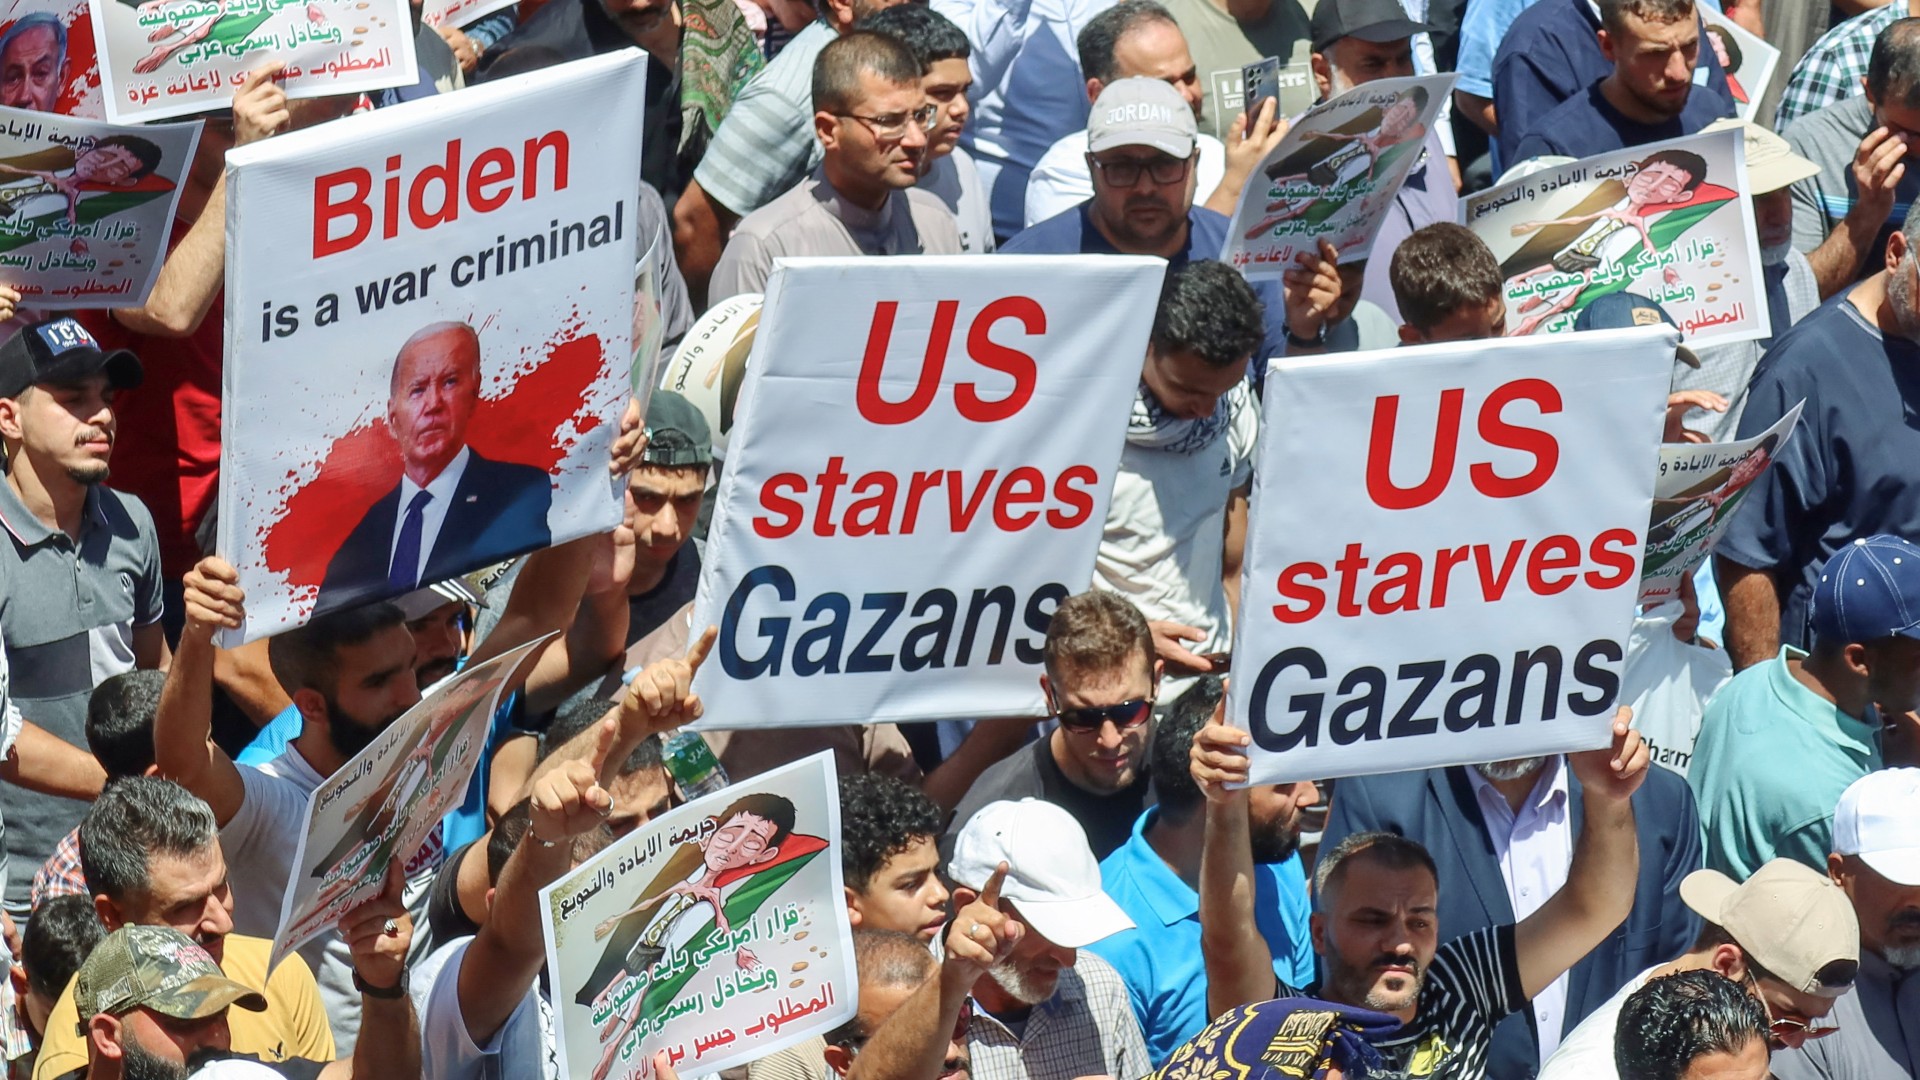 Demonstrators carry signs during a protest in support of Palestinians in Gaza, amid the ongoing conflict between Israel and Hamas, in Amman, Jordan June 28, 2024. REUTERS